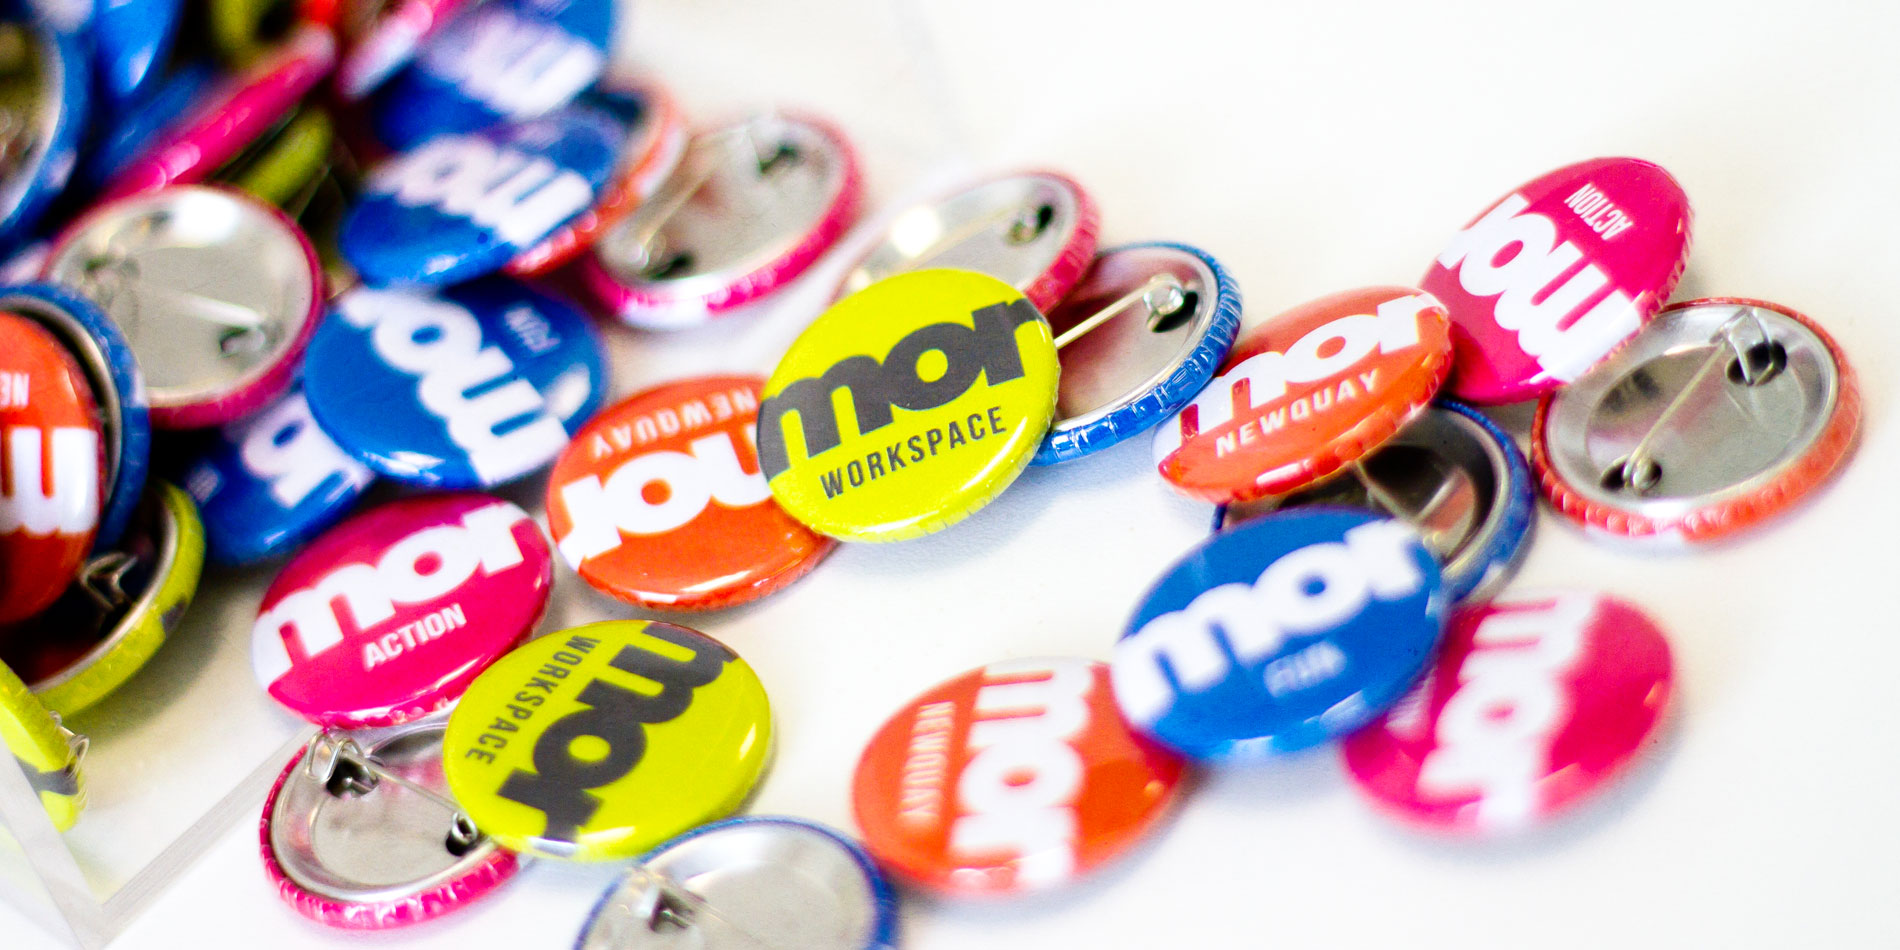 Mor Workspace branded pin badges in different colours